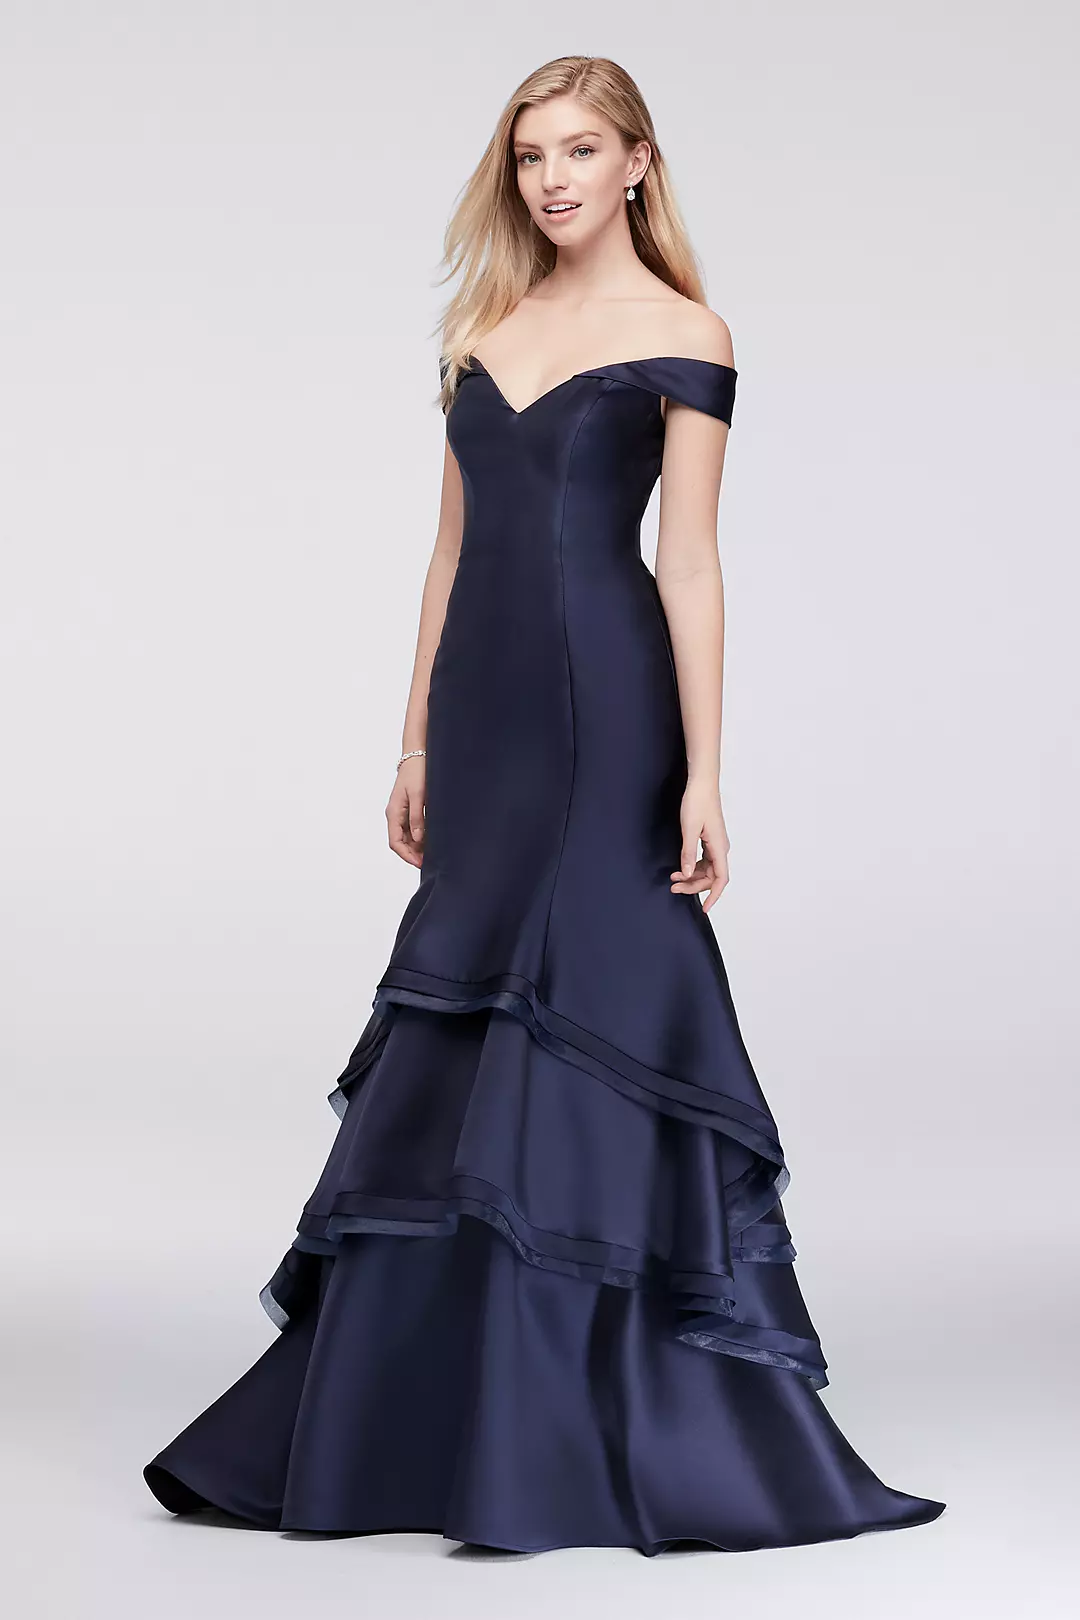 Tiered Off-the-Shoulder Satin Mermaid Dress Image